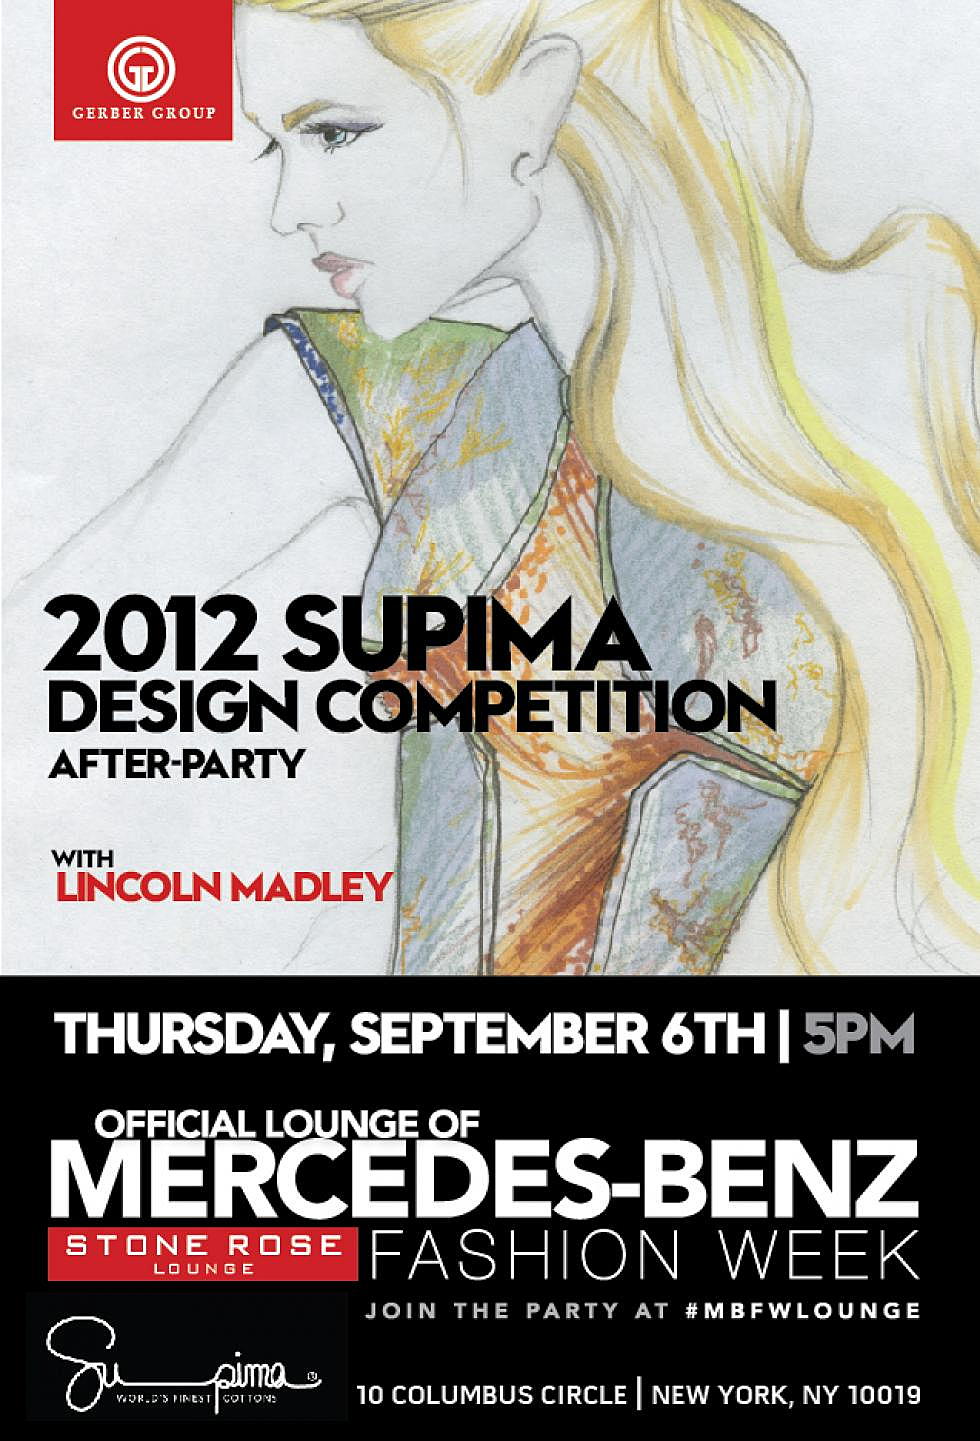 mercedes-benz fashion week: 2012 Supima Design Competition After-Party w/ Lincoln Madley